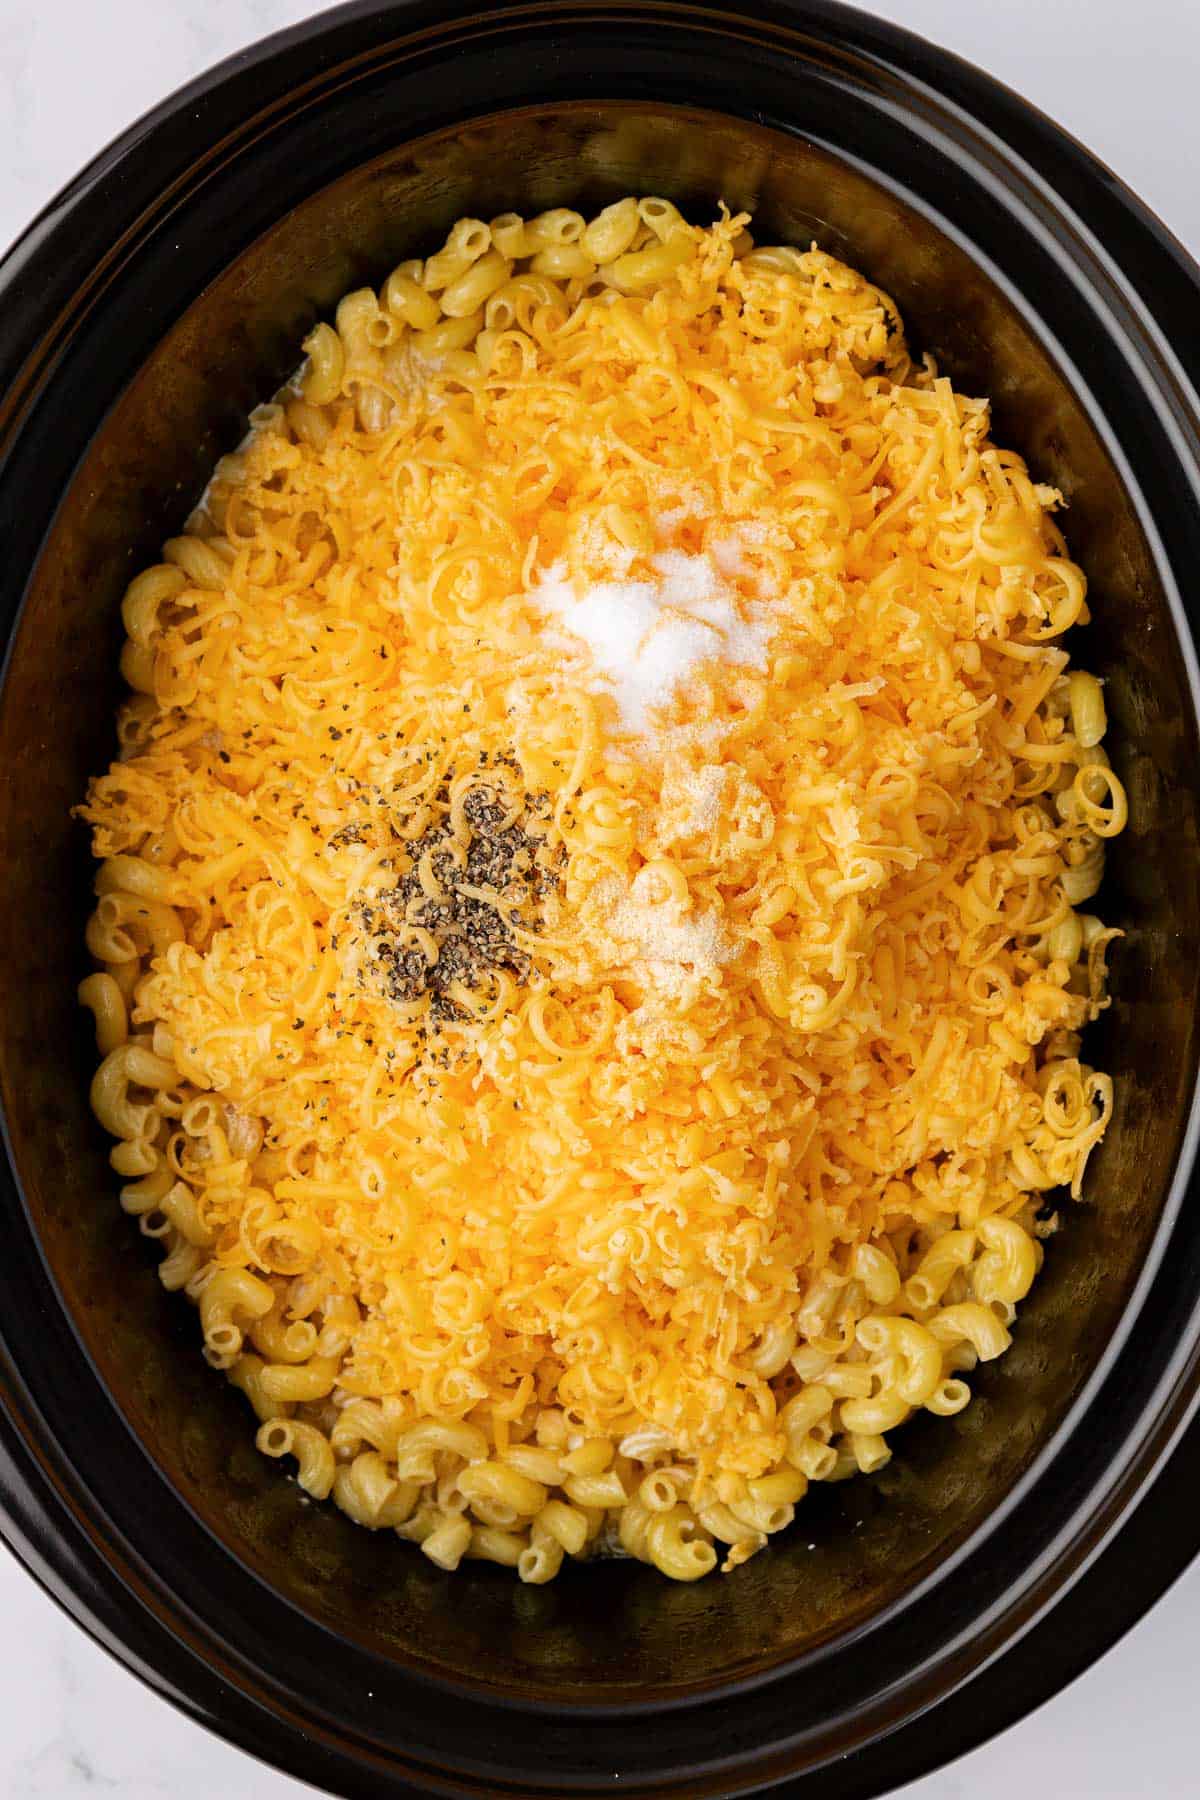 adding the cheese and spices to the macaroni noodles